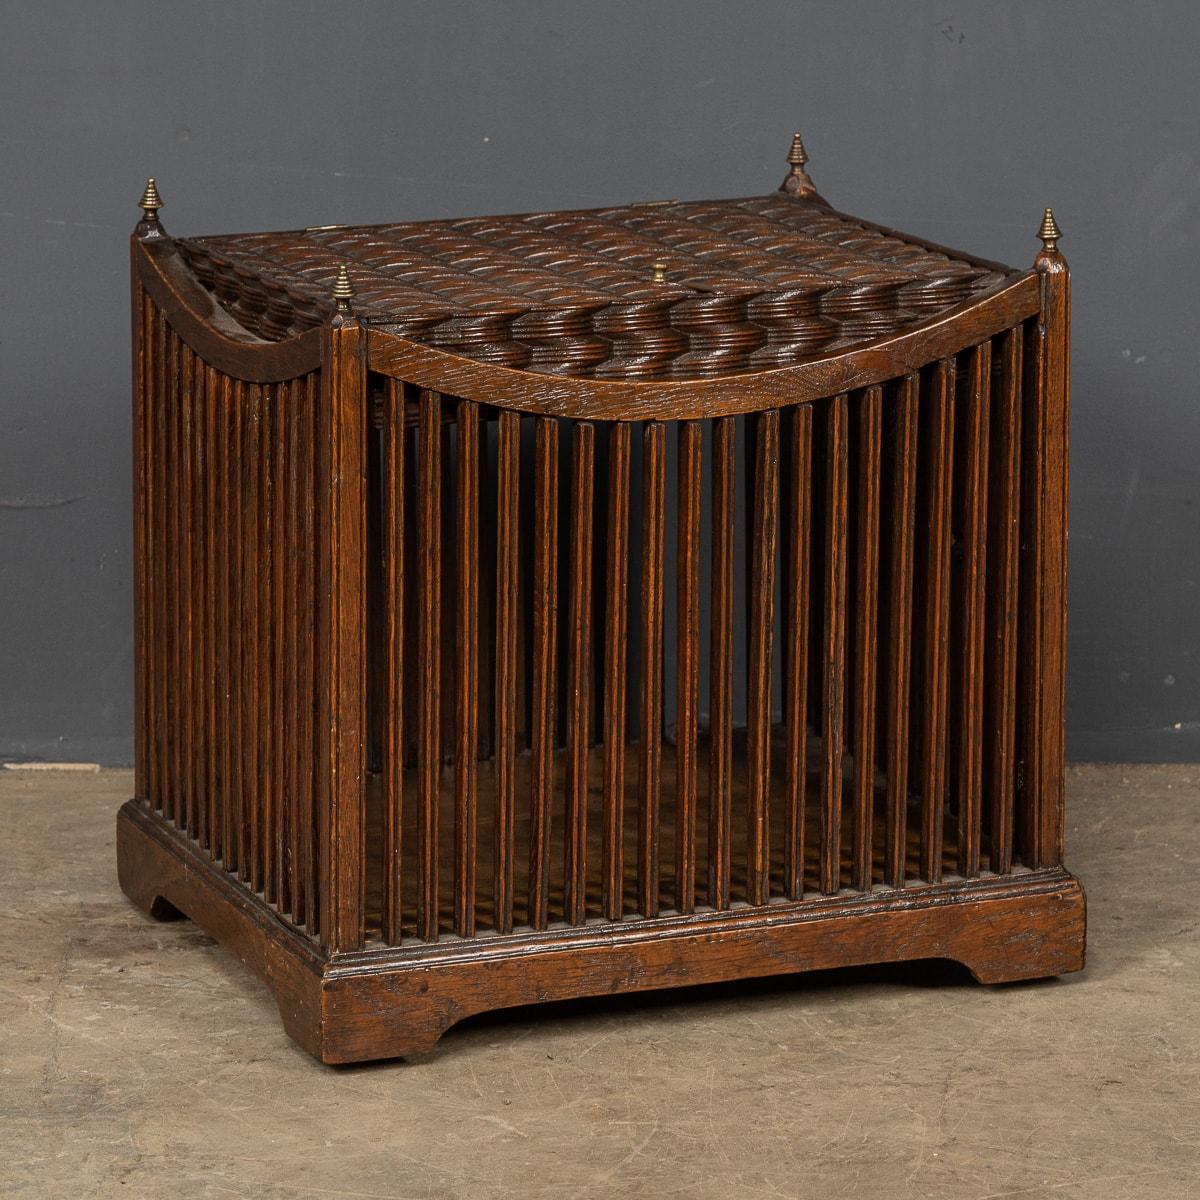 Antique early 19th century Georgian mahogany wool basket, used in the Georgian era for holding silk wools for tapestry work, practical today as the day it was made.

CONDITION
In Great Condition - No Damage.

Size
Height: 38cm
Width: